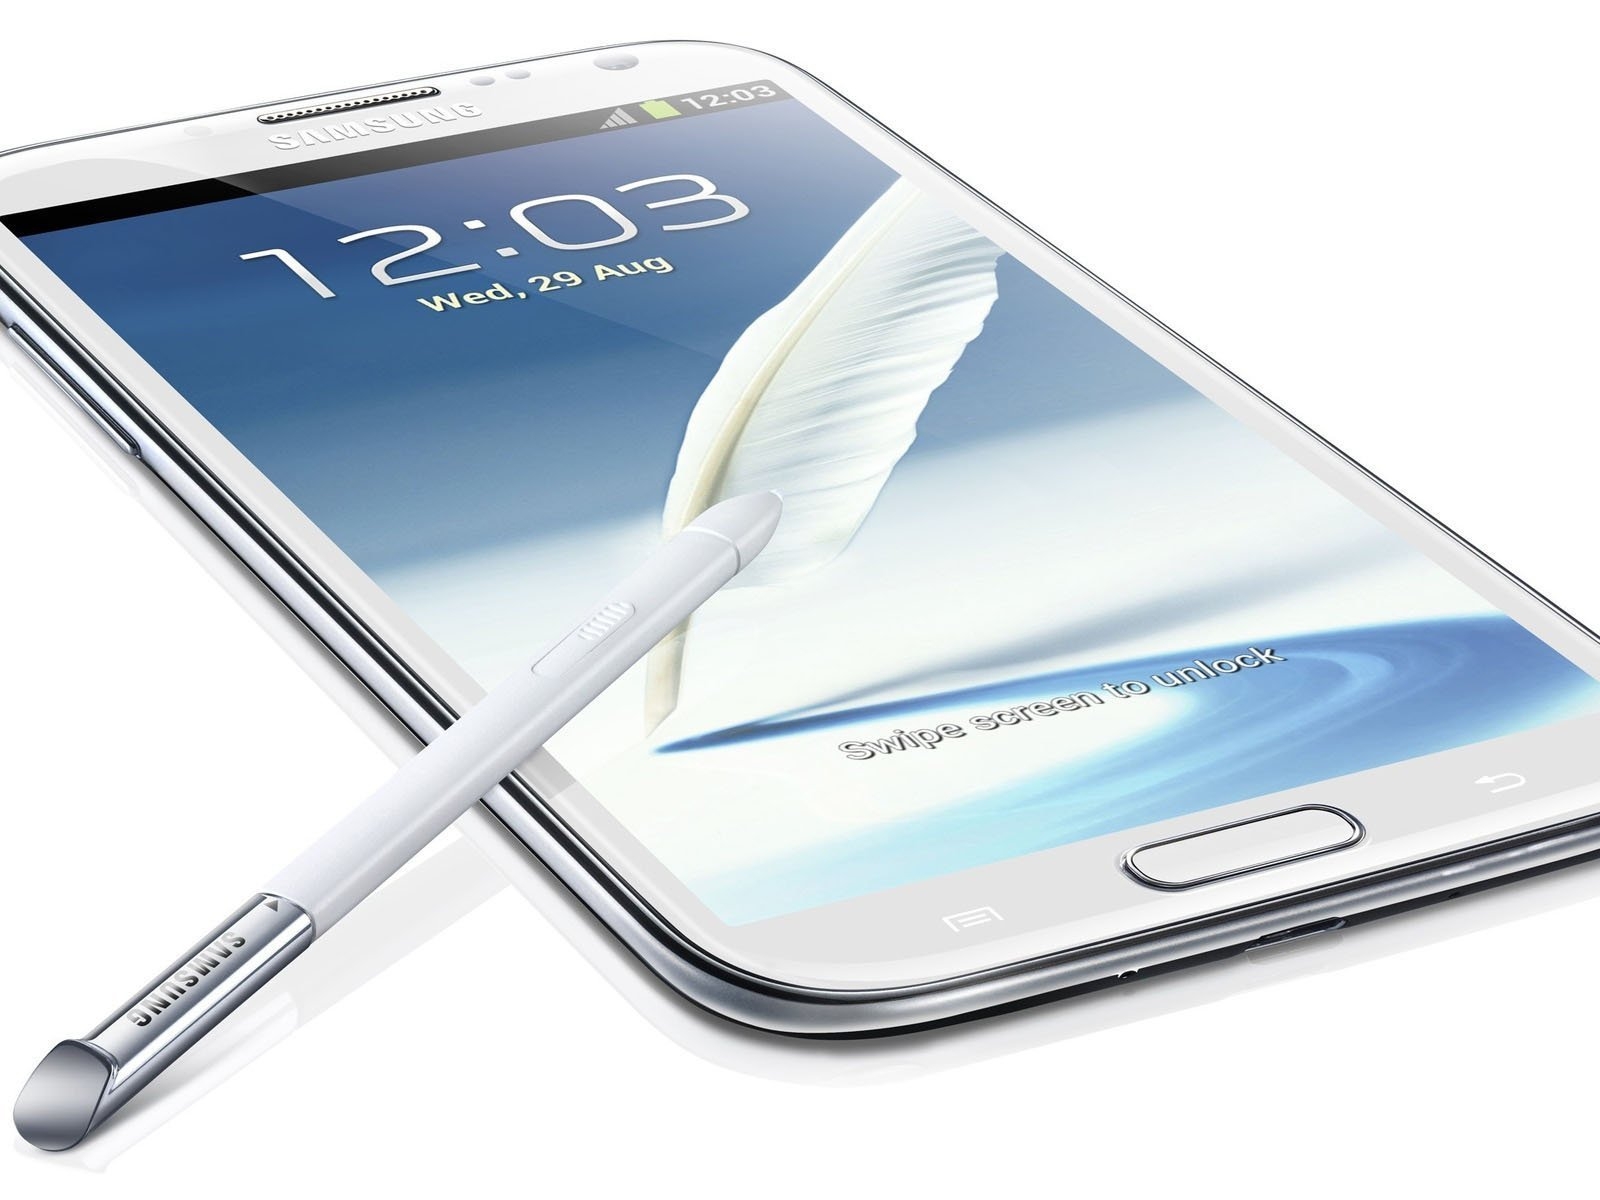 White Samsung Galaxy S3 for 1600 x 1200 resolution